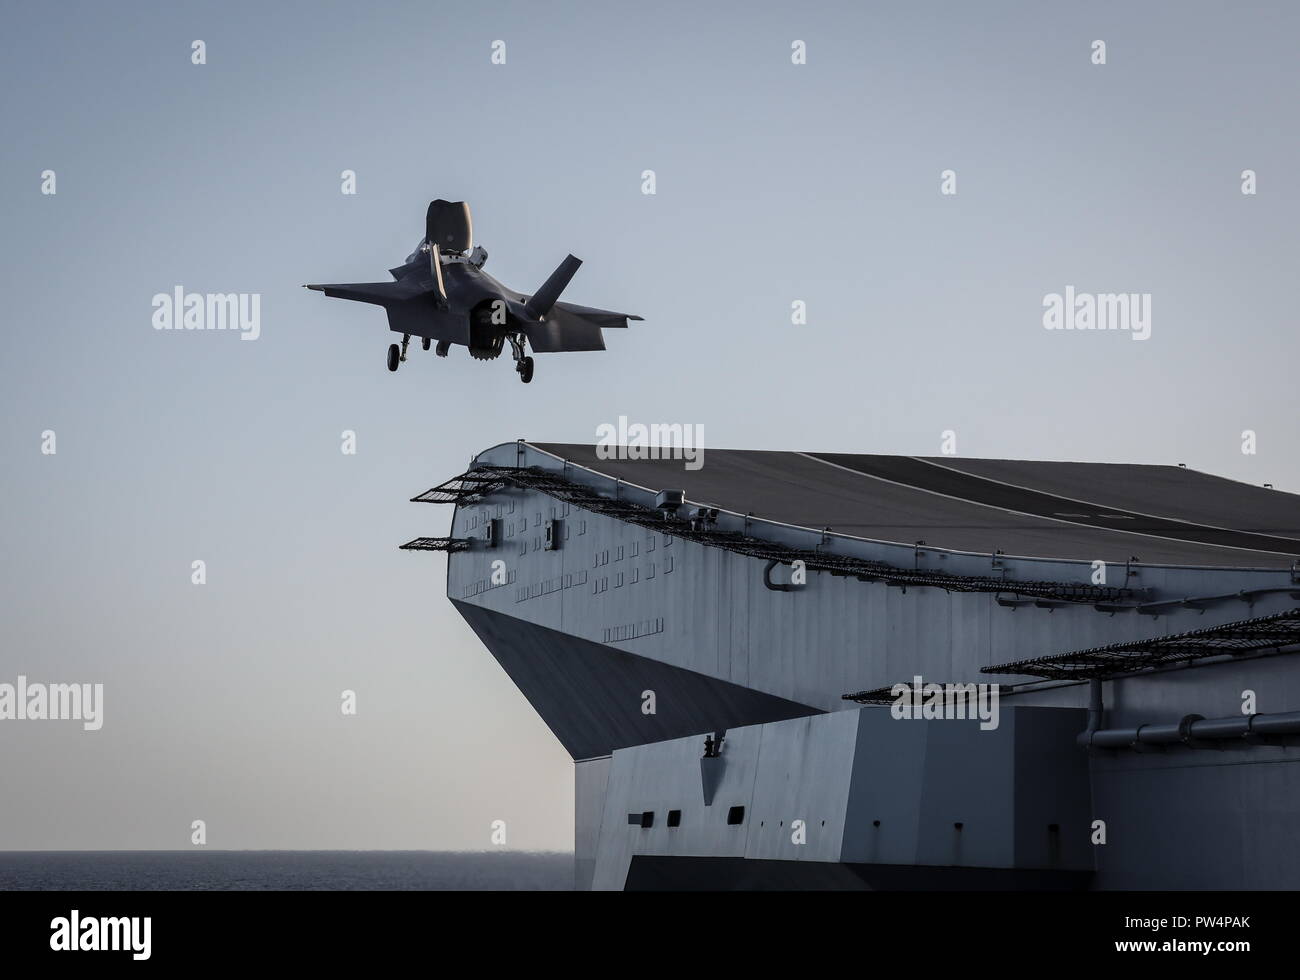 Royal Navy aircraft carrier, HMS Queen Elizabeth, has deployed to the U.S. to land fast jets on deck for the first time in eight years. In late September, the 65,000-tonne British aircraft carrier embarked two F-35B test aircraft  from the Integrated Test Force (ITF), based out of Naval Air Station Patuxent River, Maryland, along with nearly 200 ITF supporting staff, including pilots, engineers, maintainers and data analysts for the testing period at sea. The aim of these initial, or developmental trials, are to ascertain, through the specially equipped aircraft and sensors around the ship, th Stock Photo